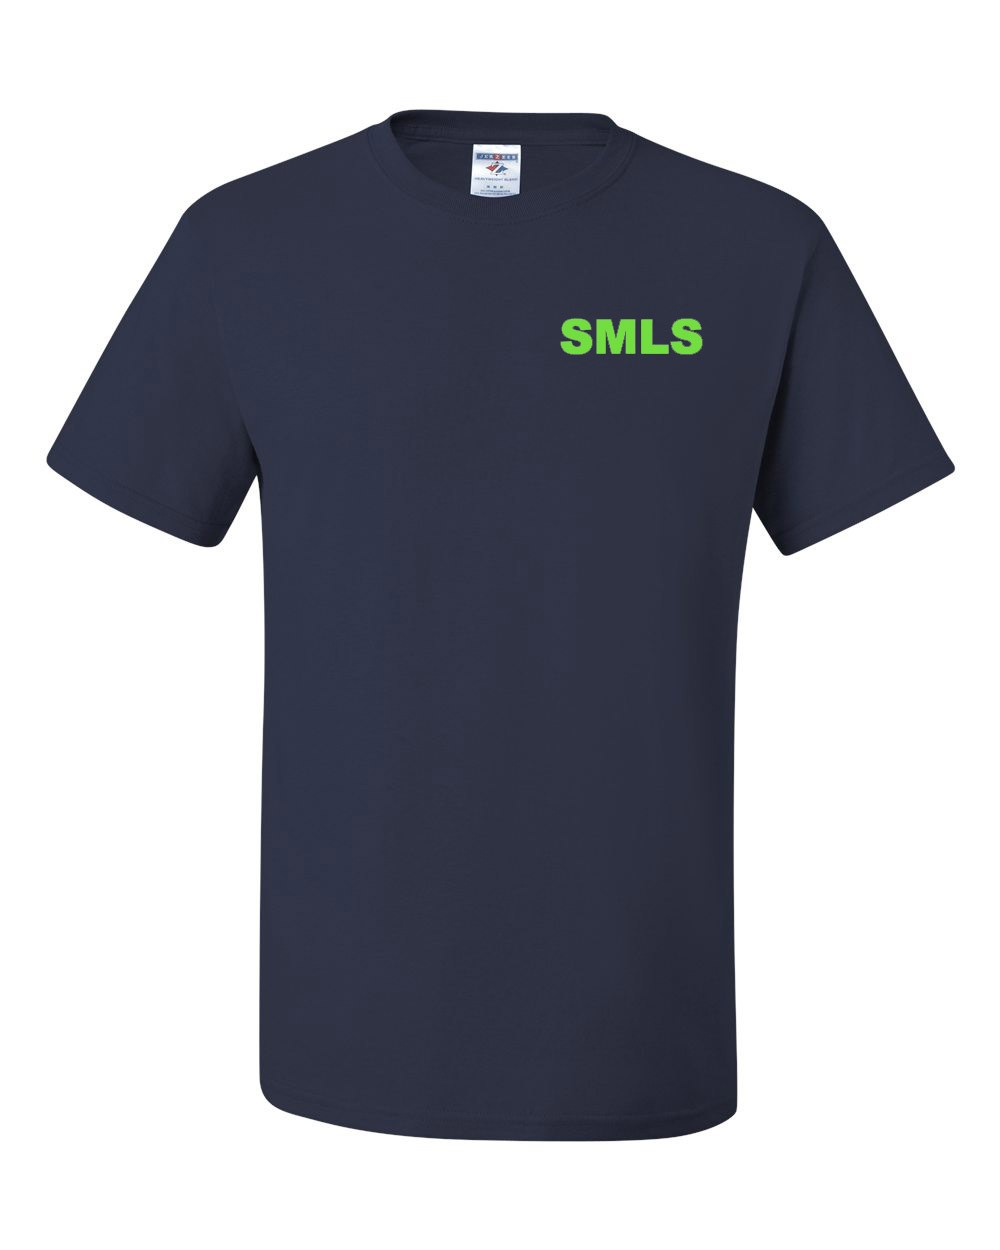 SMLS S/S Staff T-Shirt w/ SMLS Spirit Logo - Please Allow 2-3 Weeks for Delivery